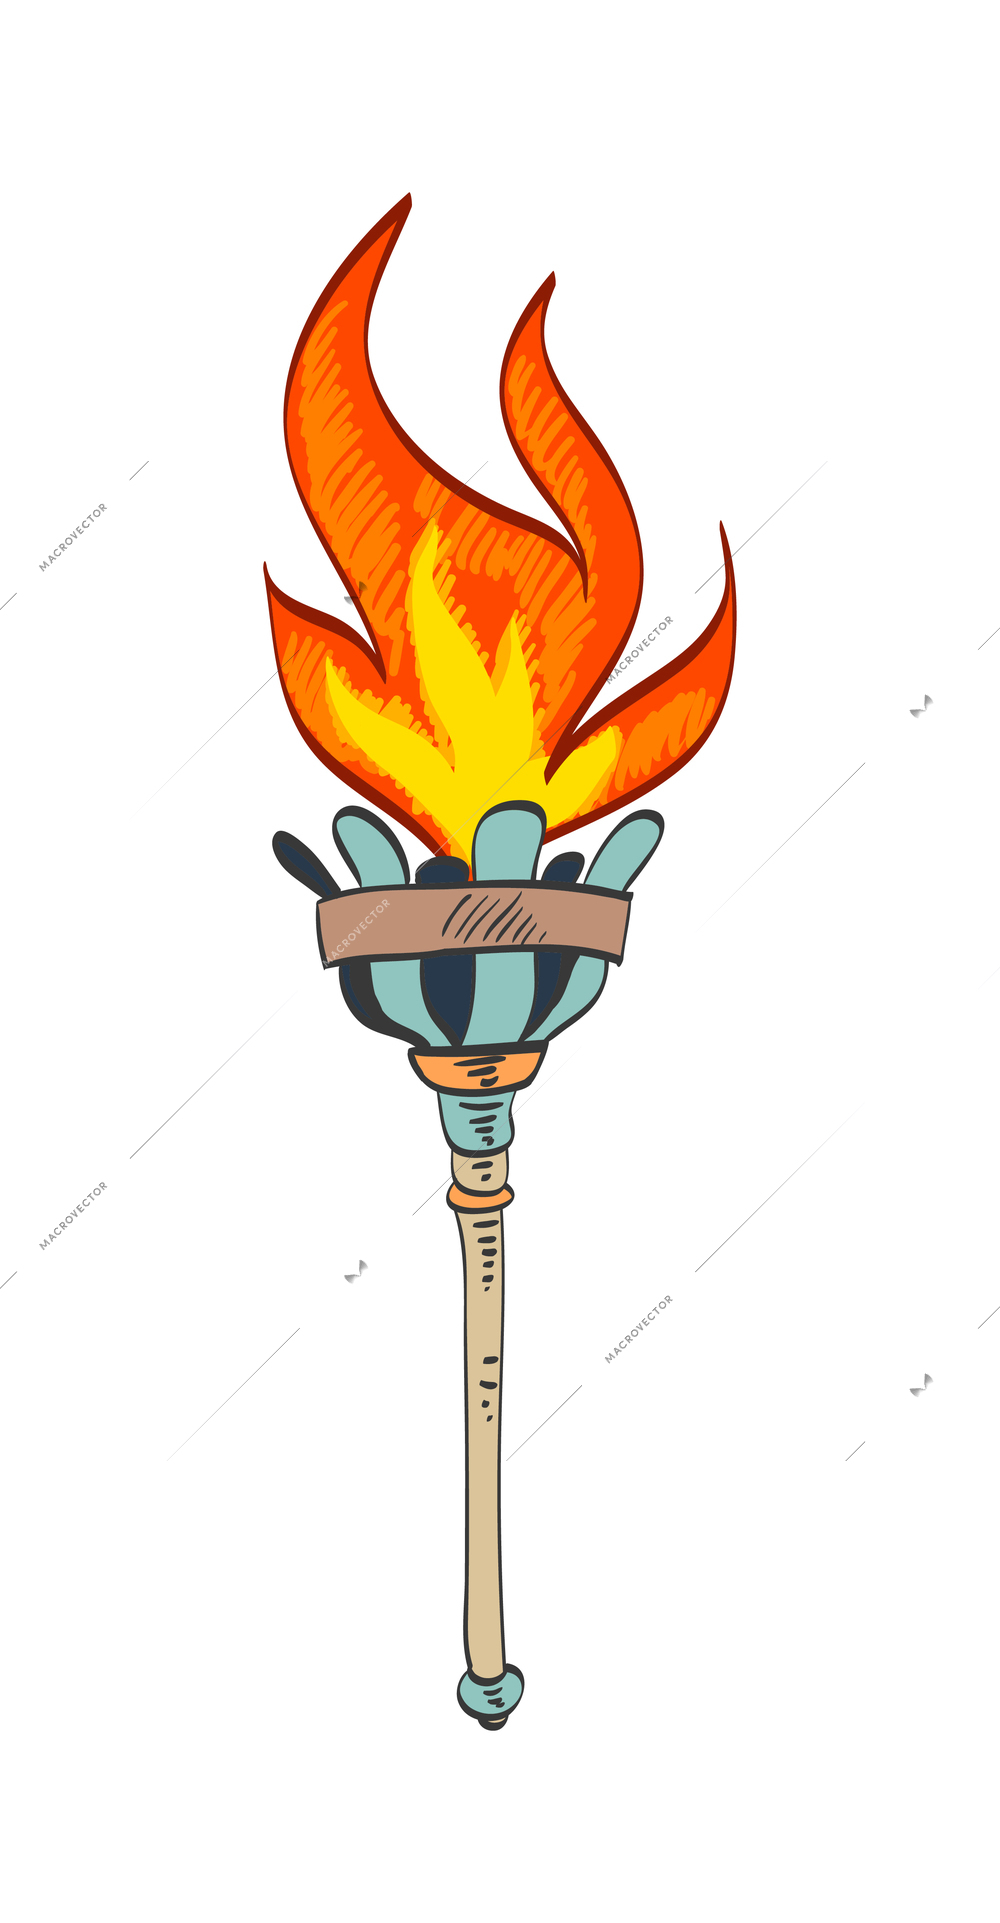 Torch composition with isolated sketch style icon of burning flame with ornate handle vector illustration